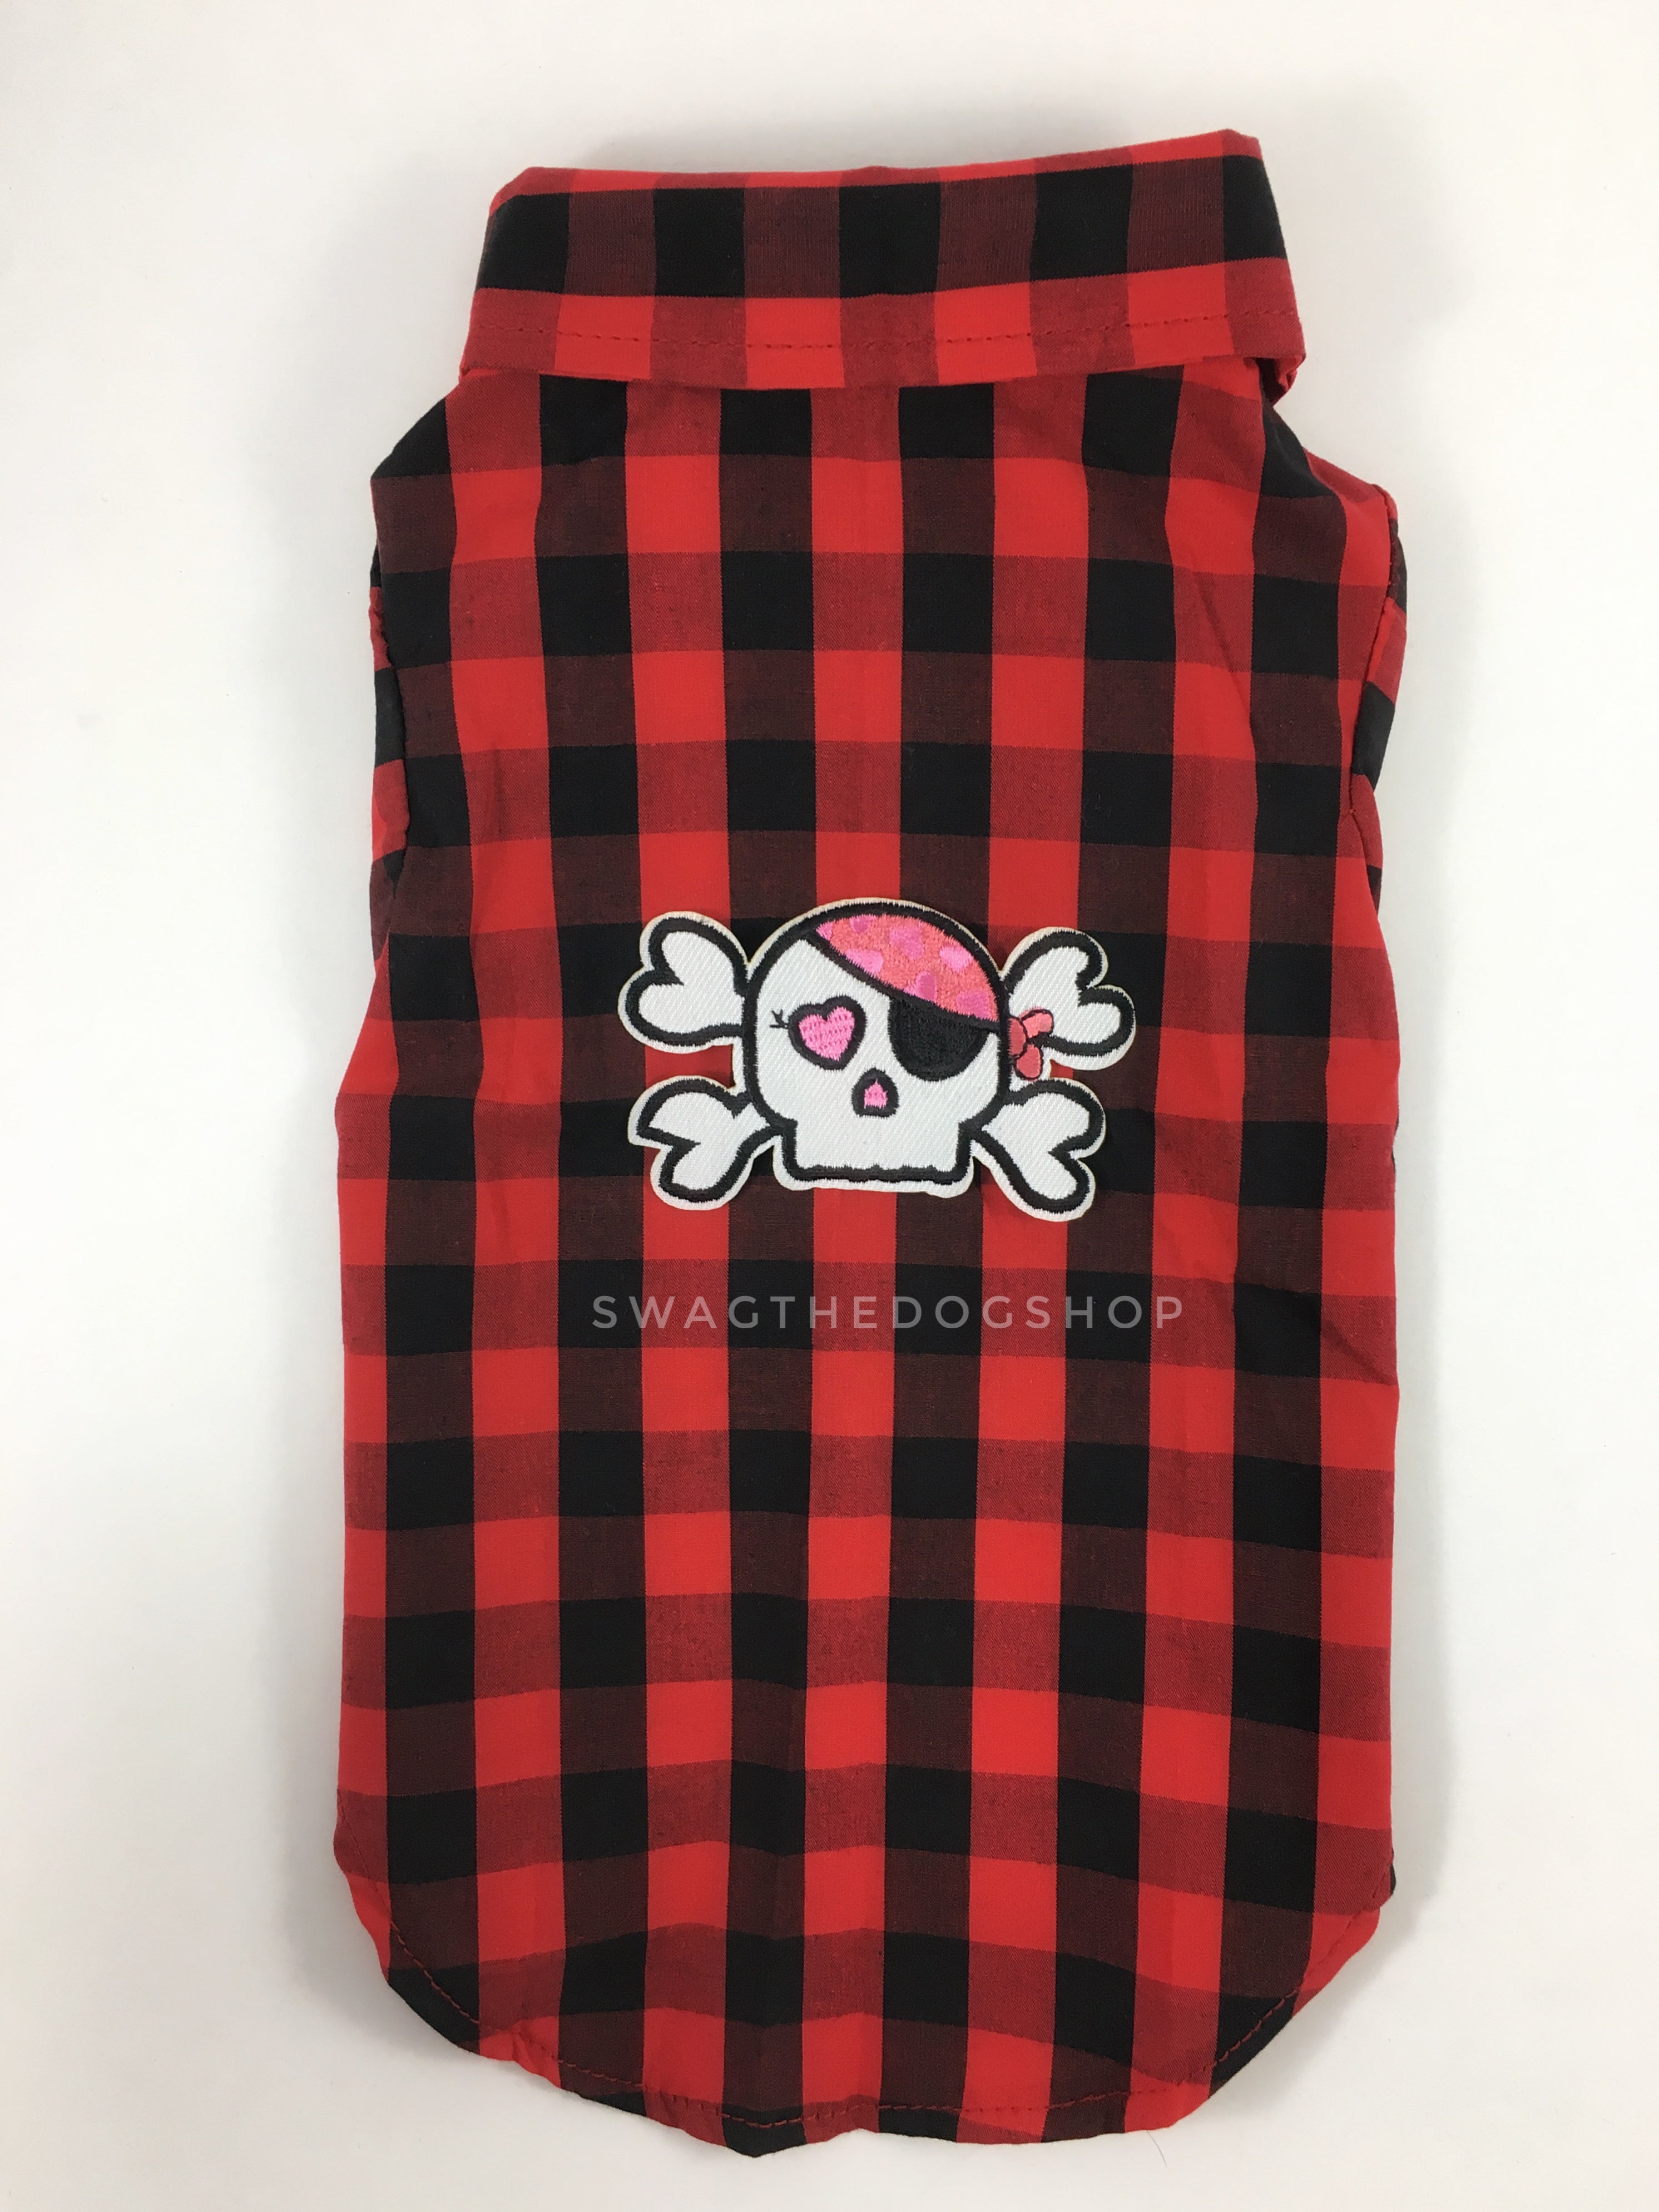 Kenora Summer Shirt - Patch Option of Badass Skull on the Back. Black and Red Checker Pattern Gingham Shirt